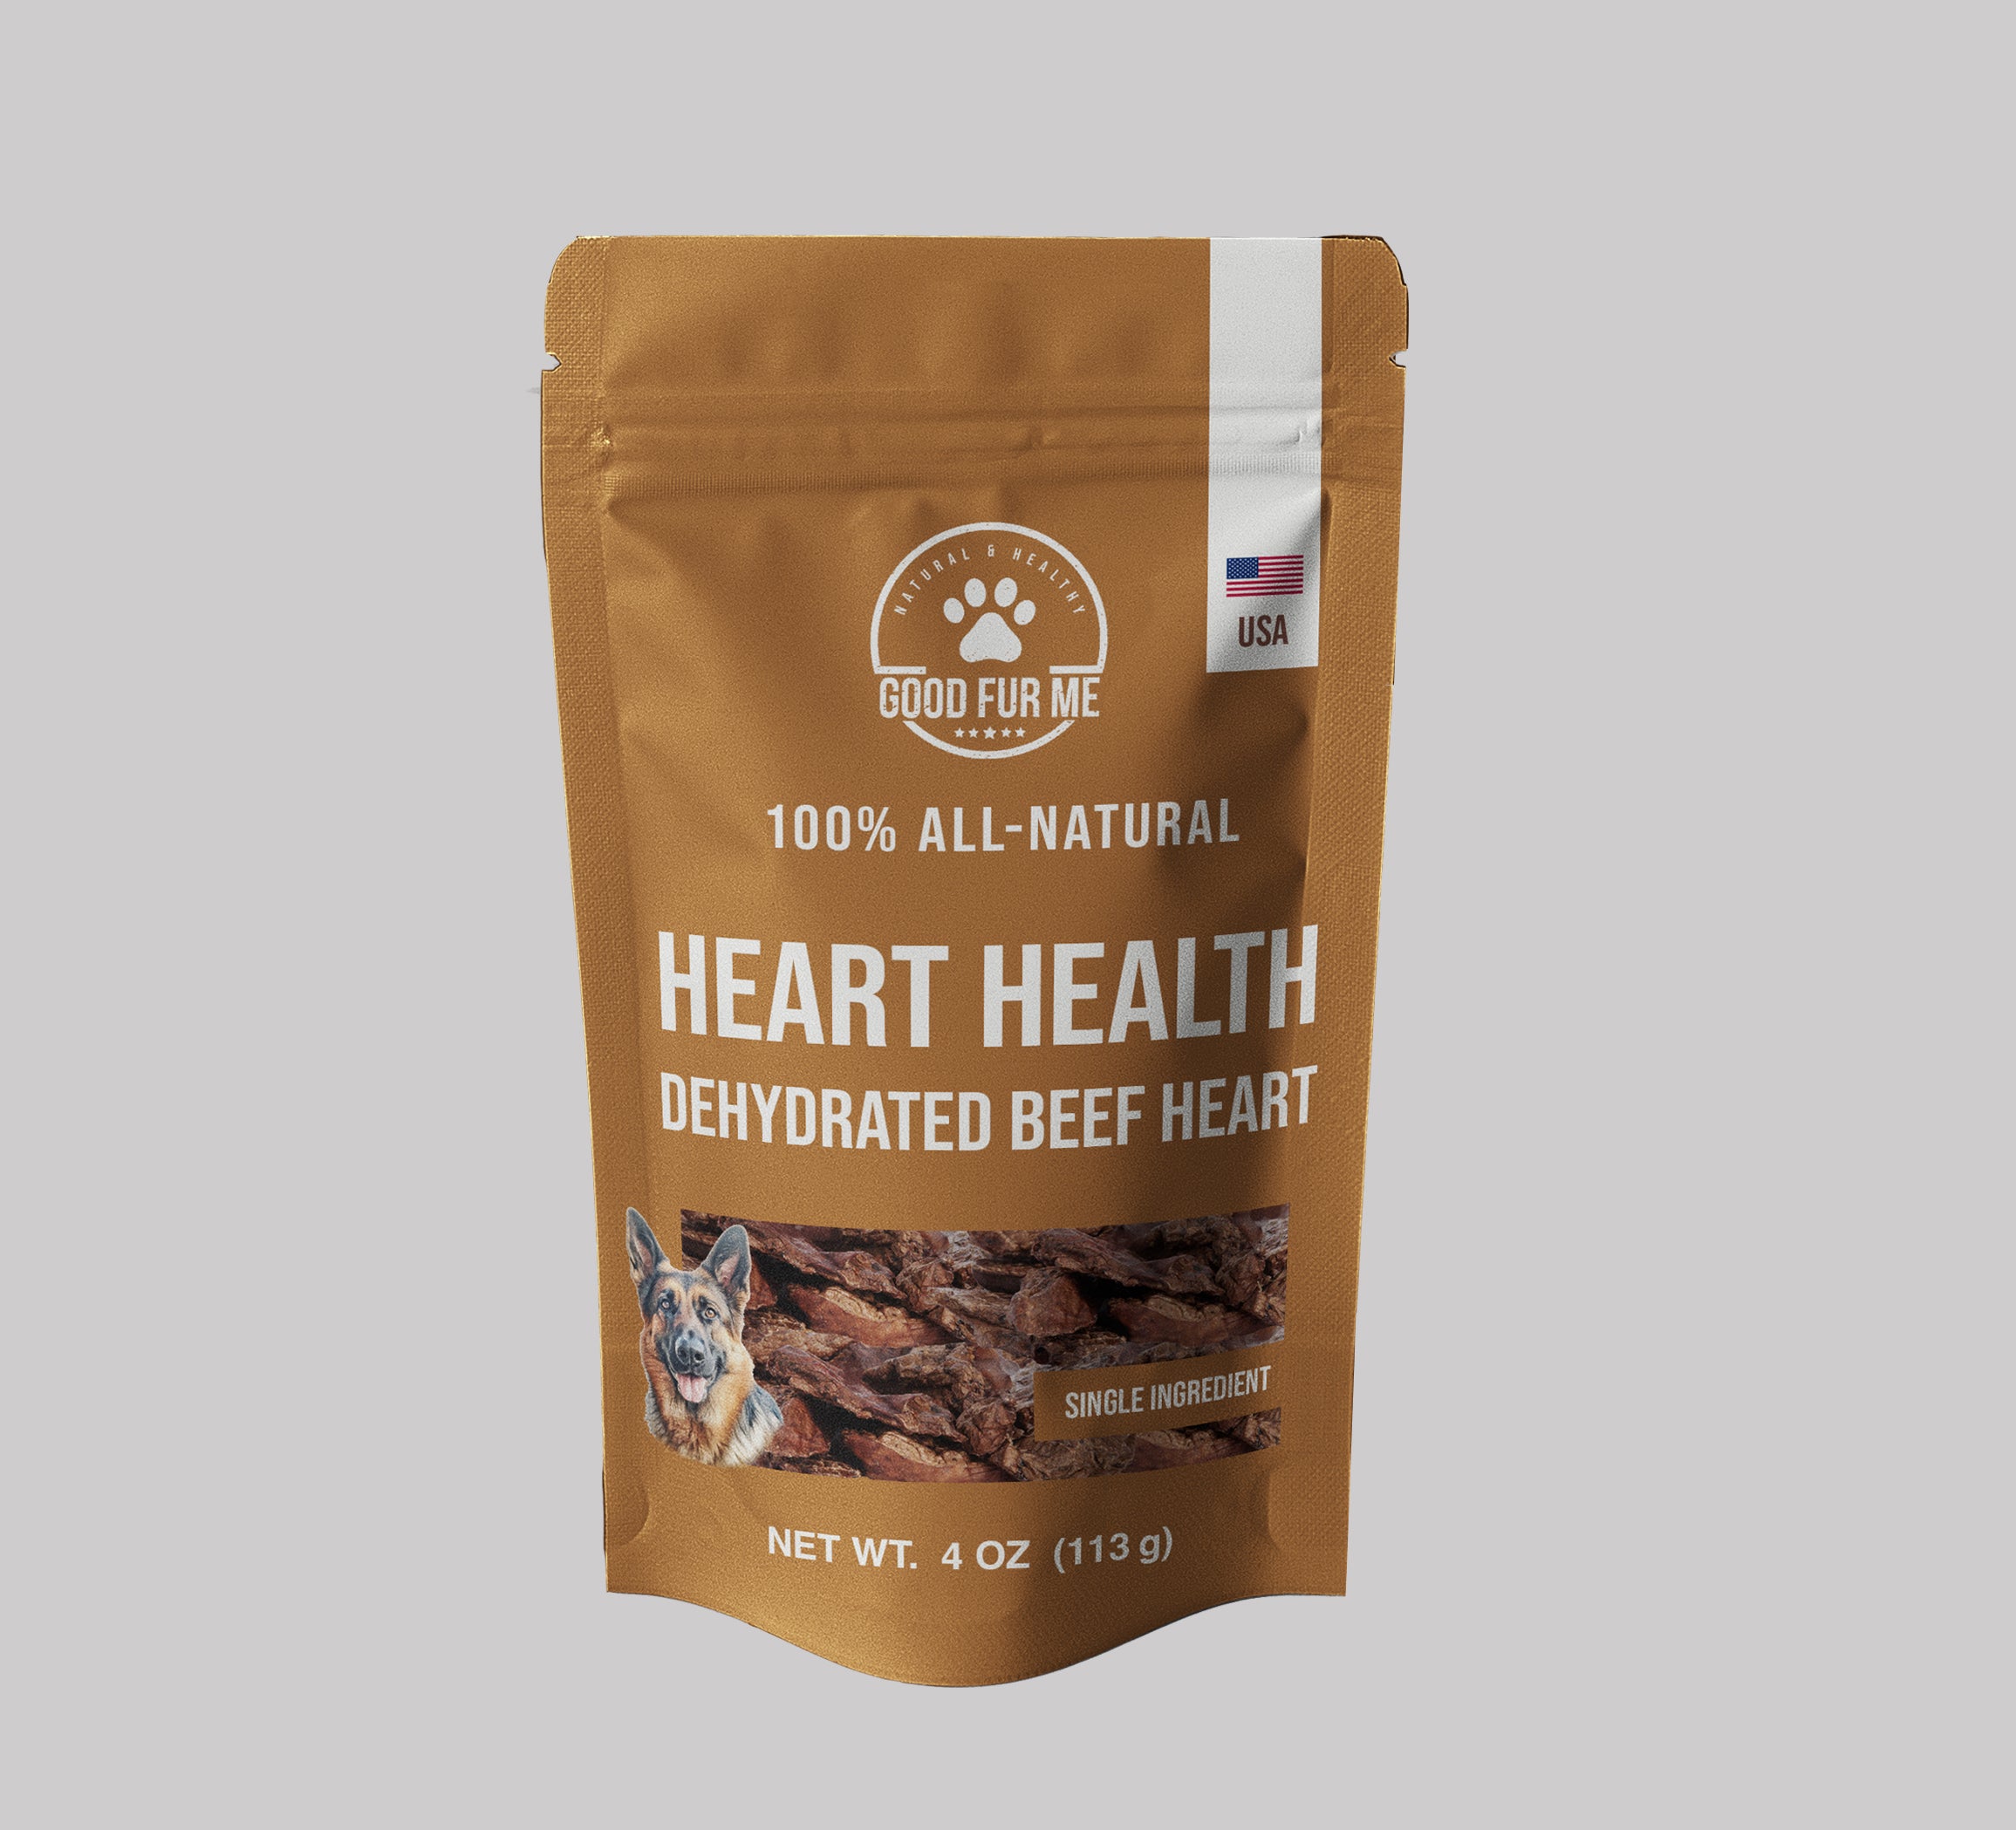 100% All-Natural Dehydrated Beef Heart